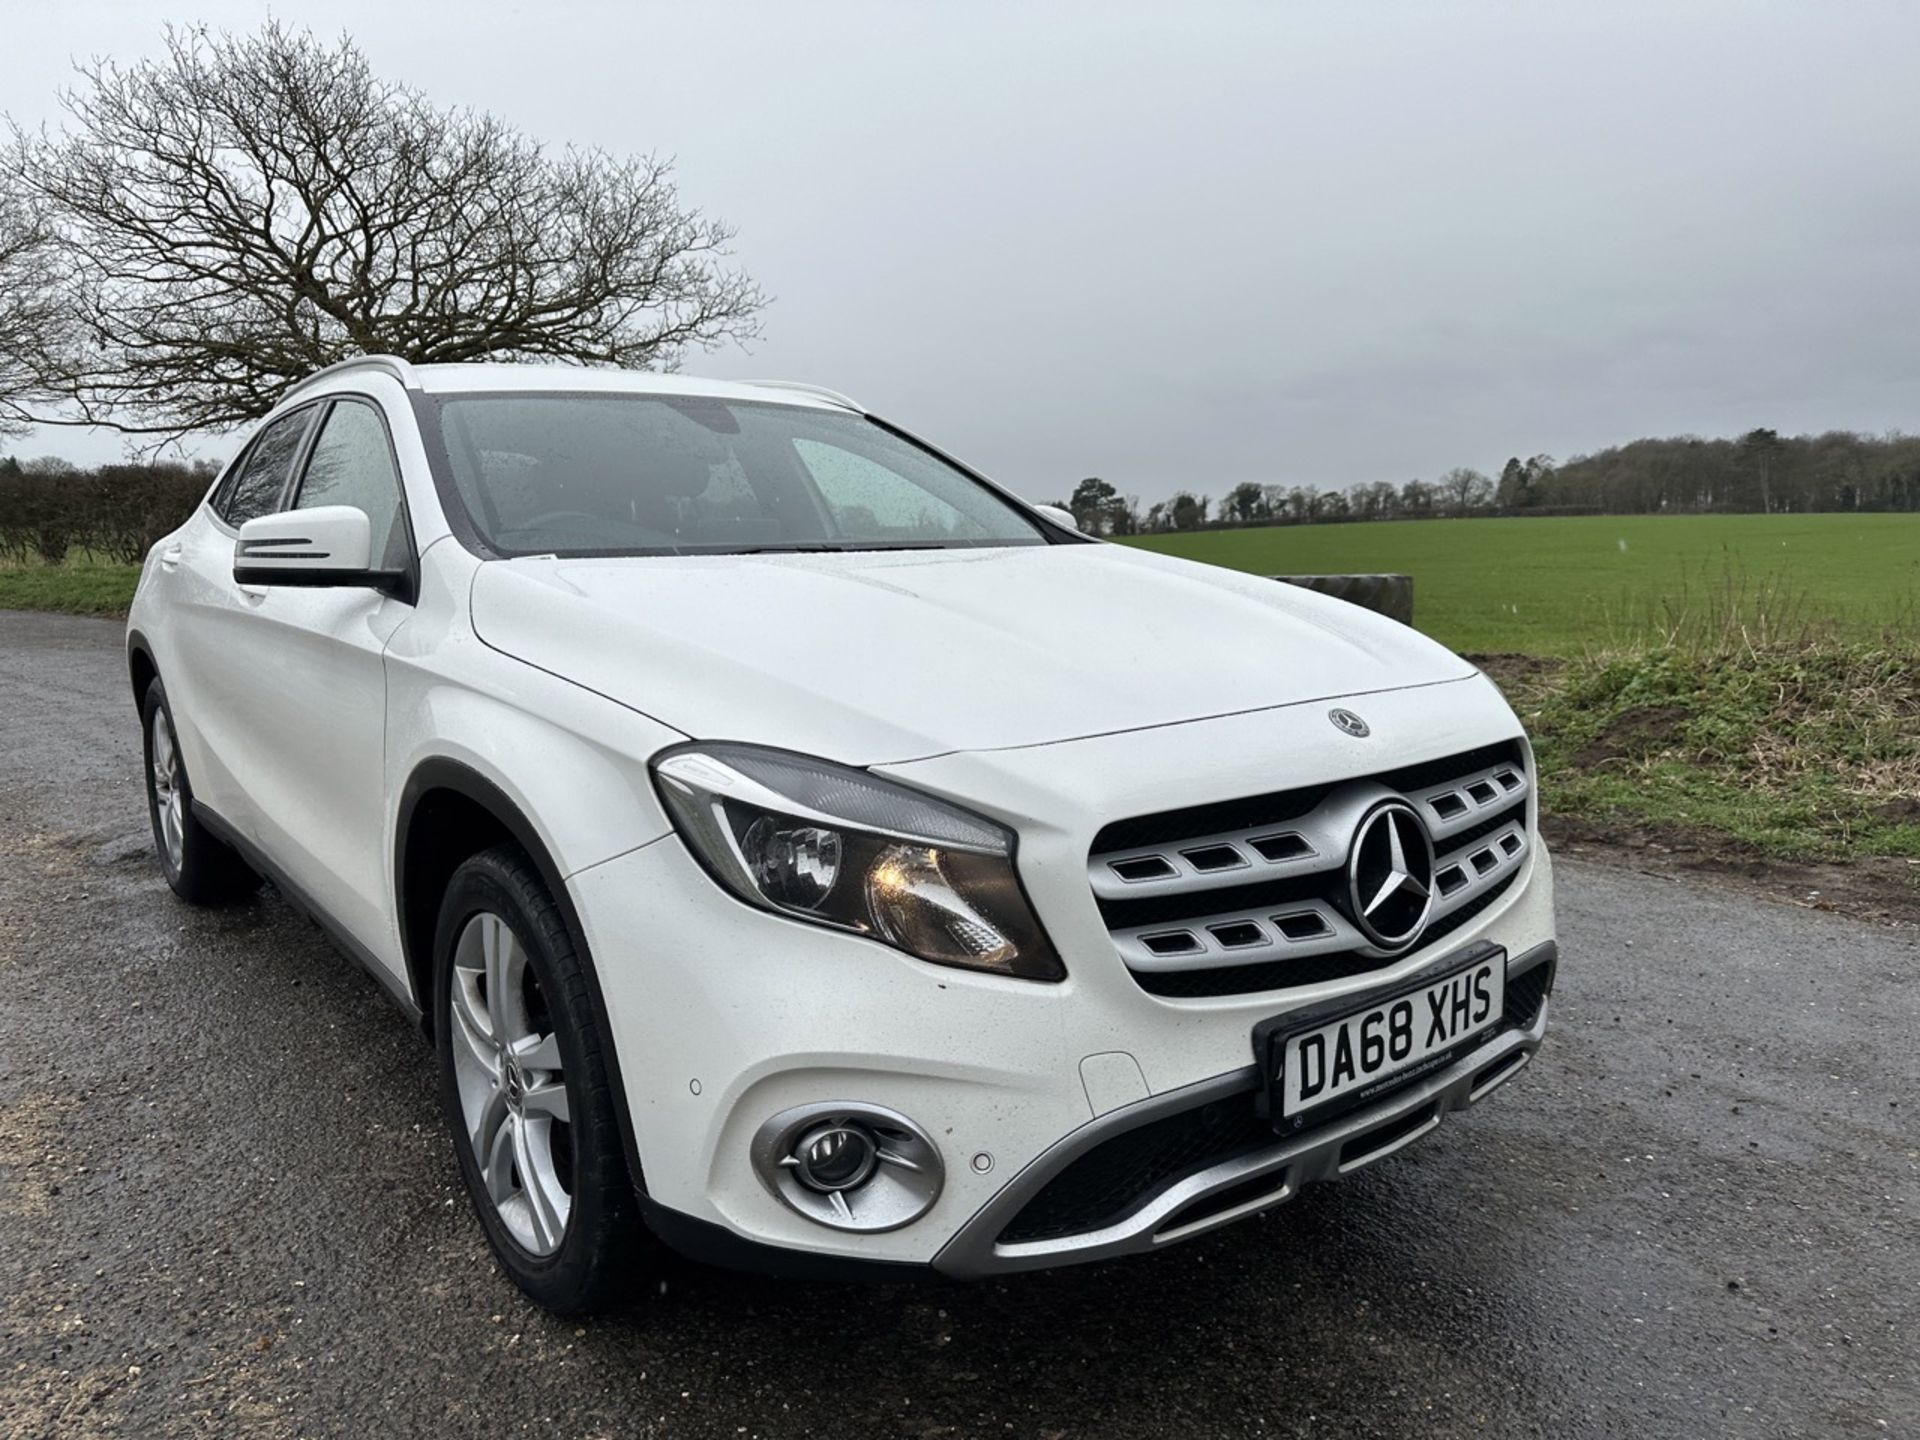 MERCEDES GLA 200d AUTO "SPORT EXECUTIVE" 2019 MODEL - LEATHER - LOW MILES - AIR CON - Image 3 of 17